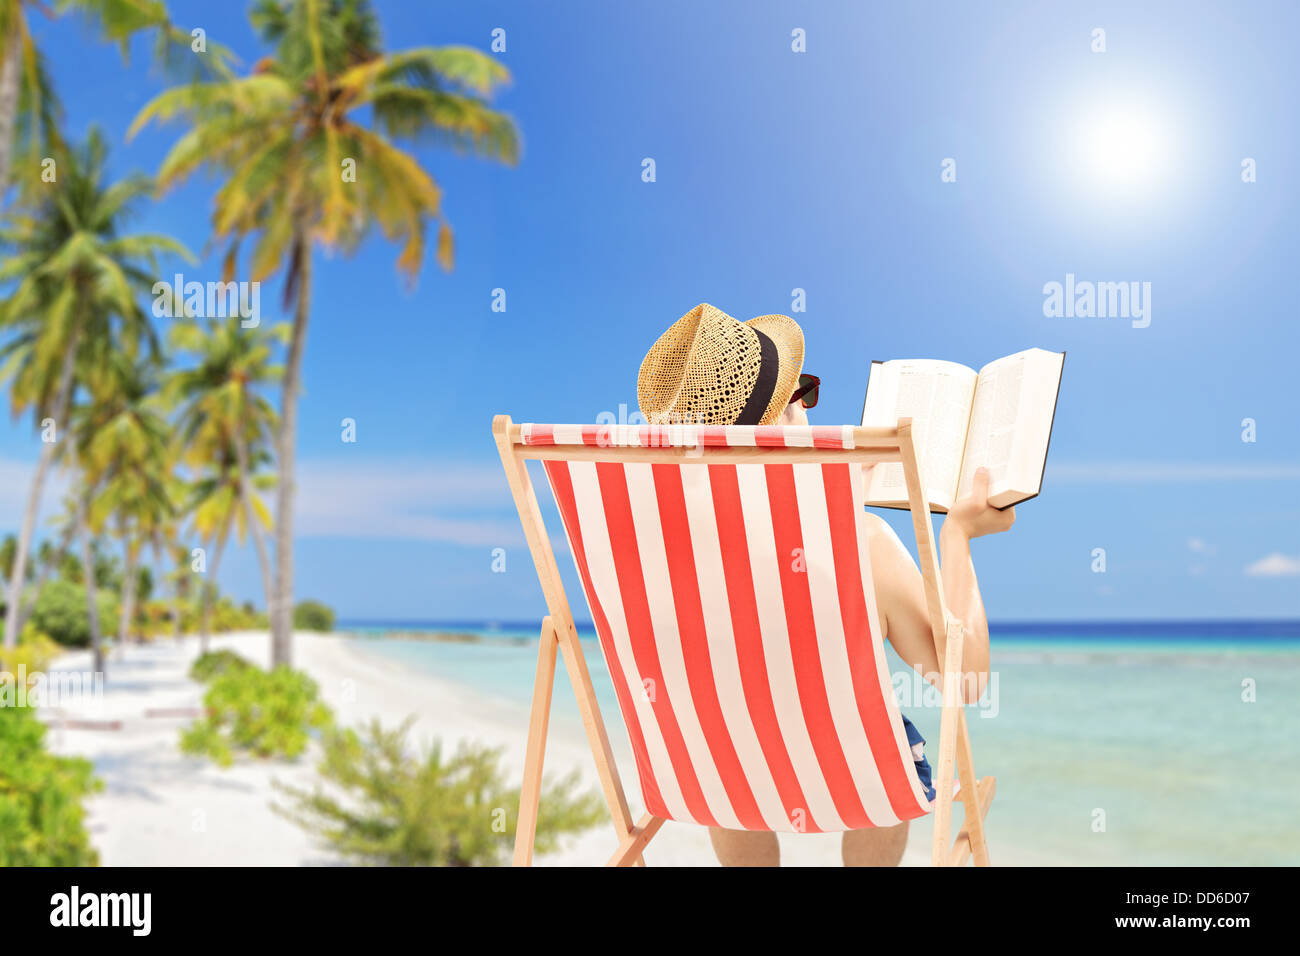 Young man lying on an outdoor chair and reading book, on a tropical beach Stock Photo